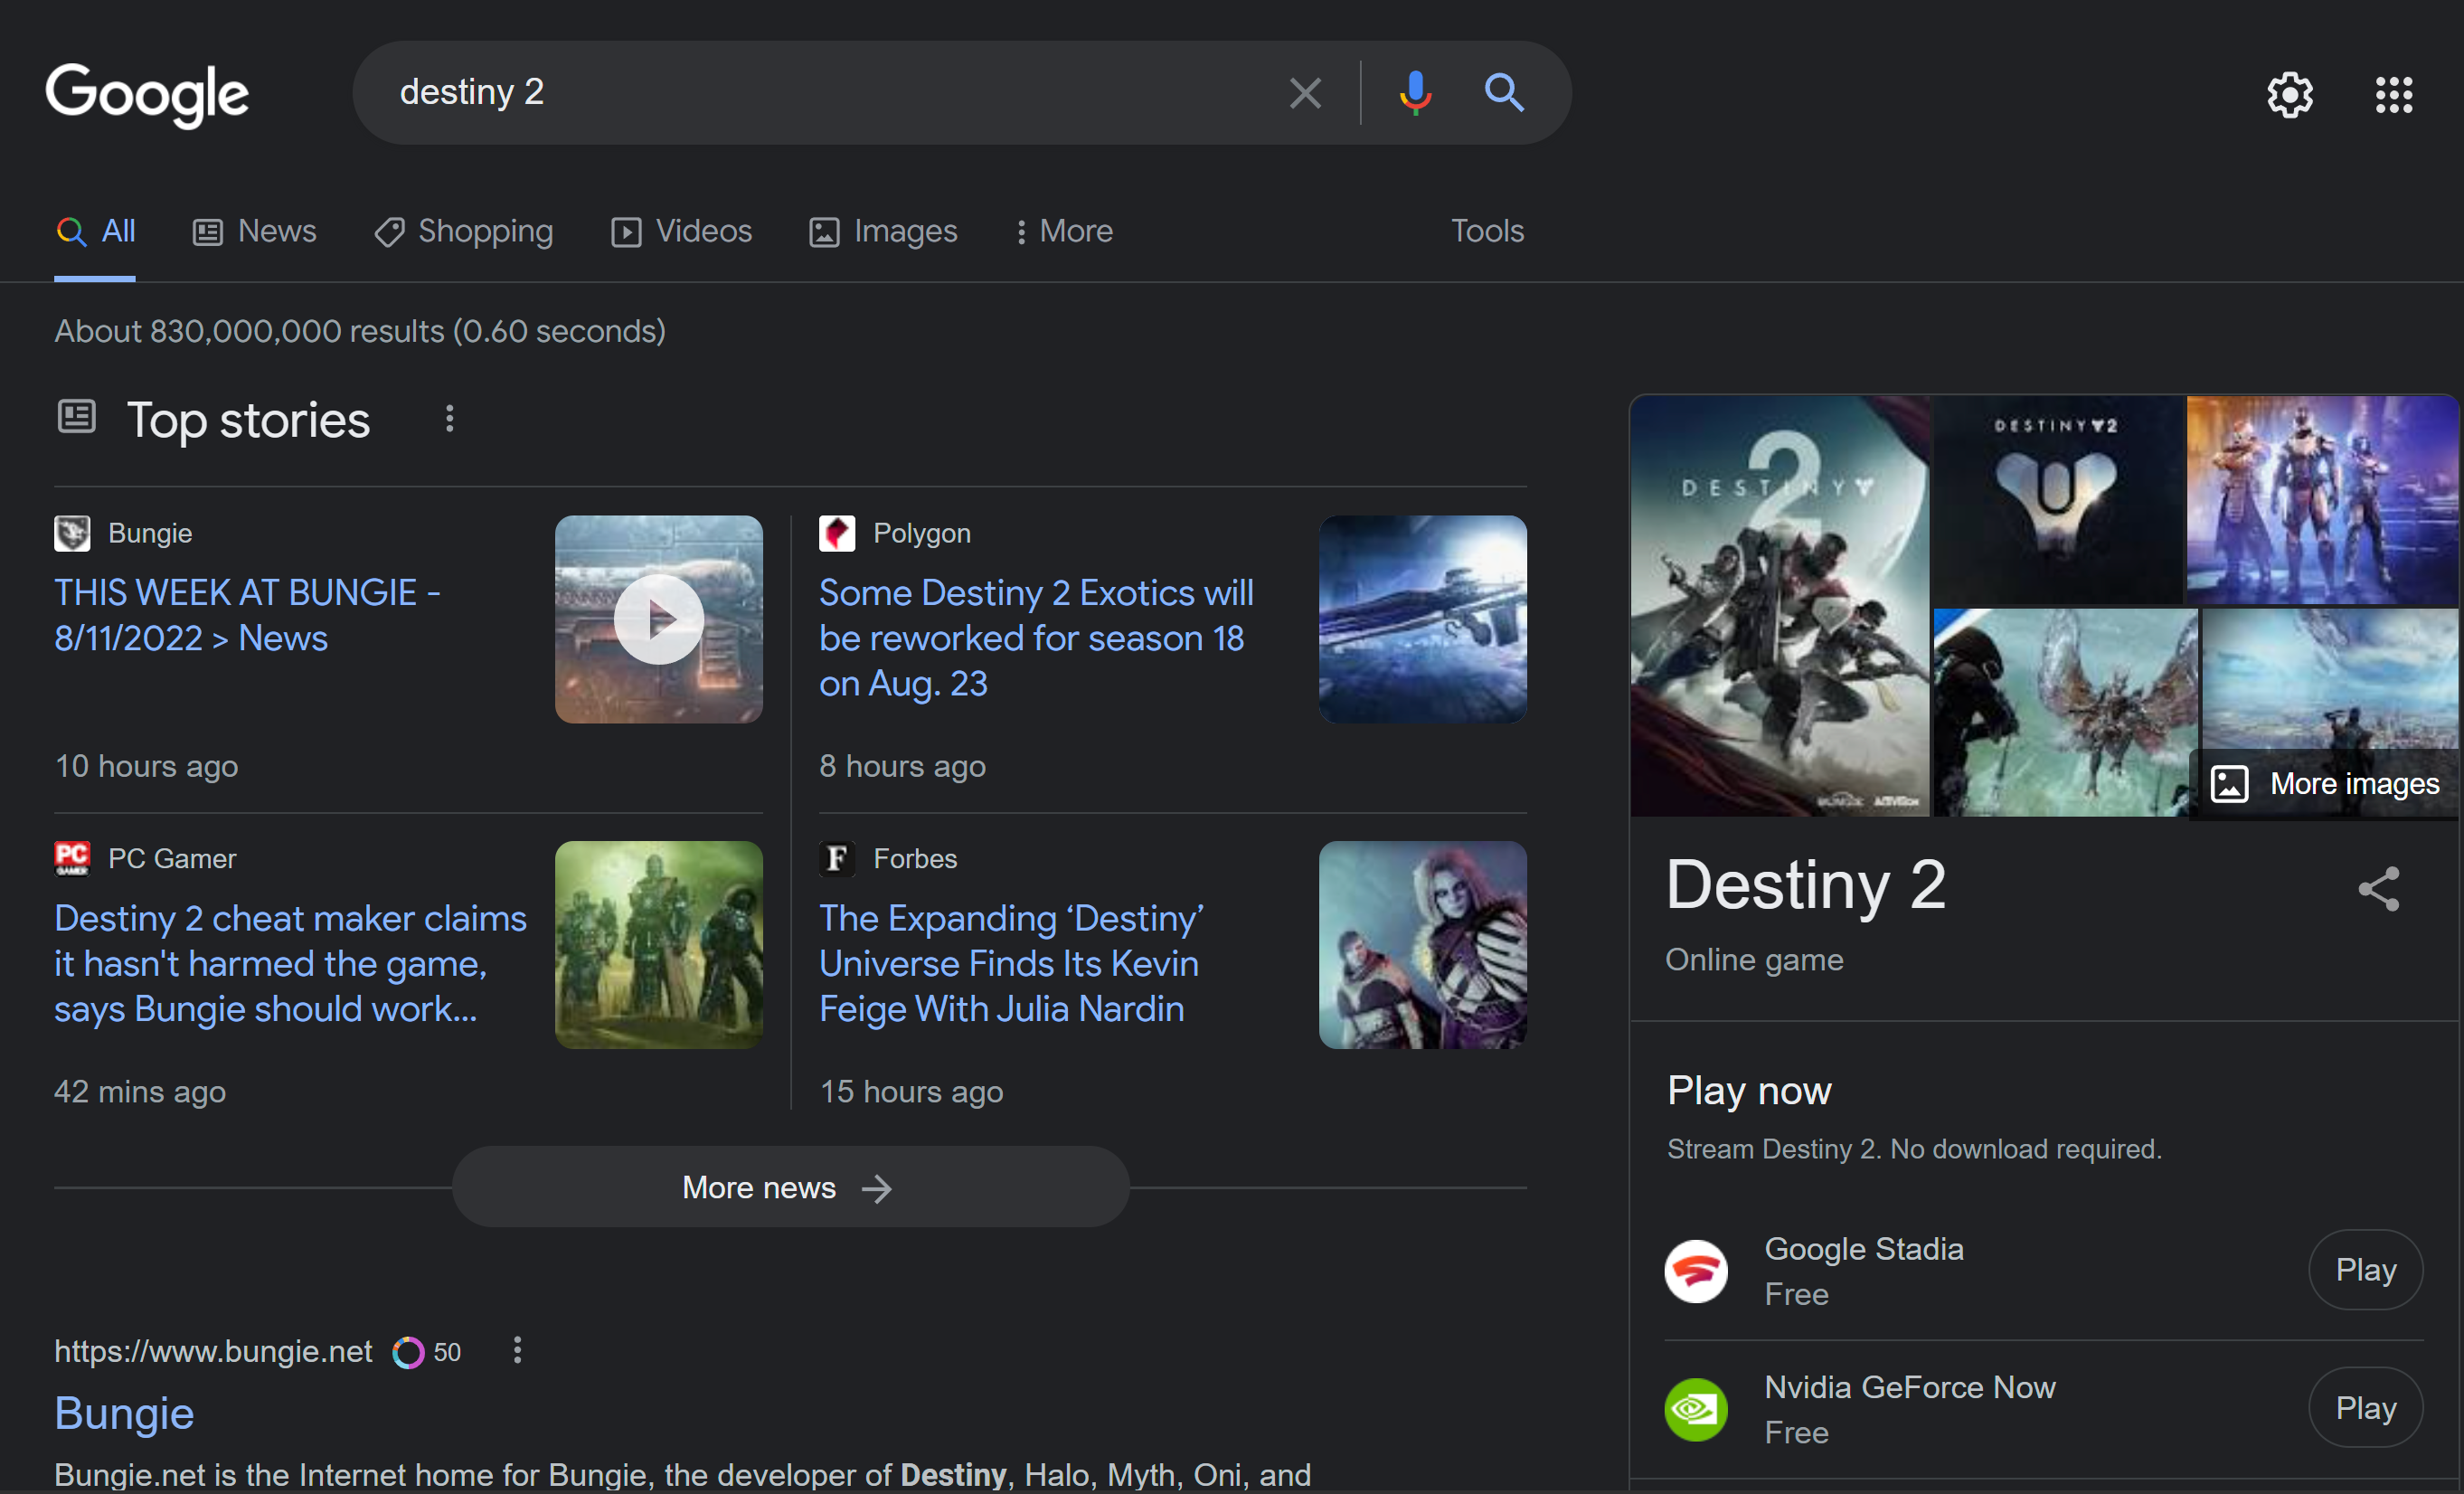 Google Launches Games in Google+, Now Play Free Games Using Your Google+  Account – AskVG